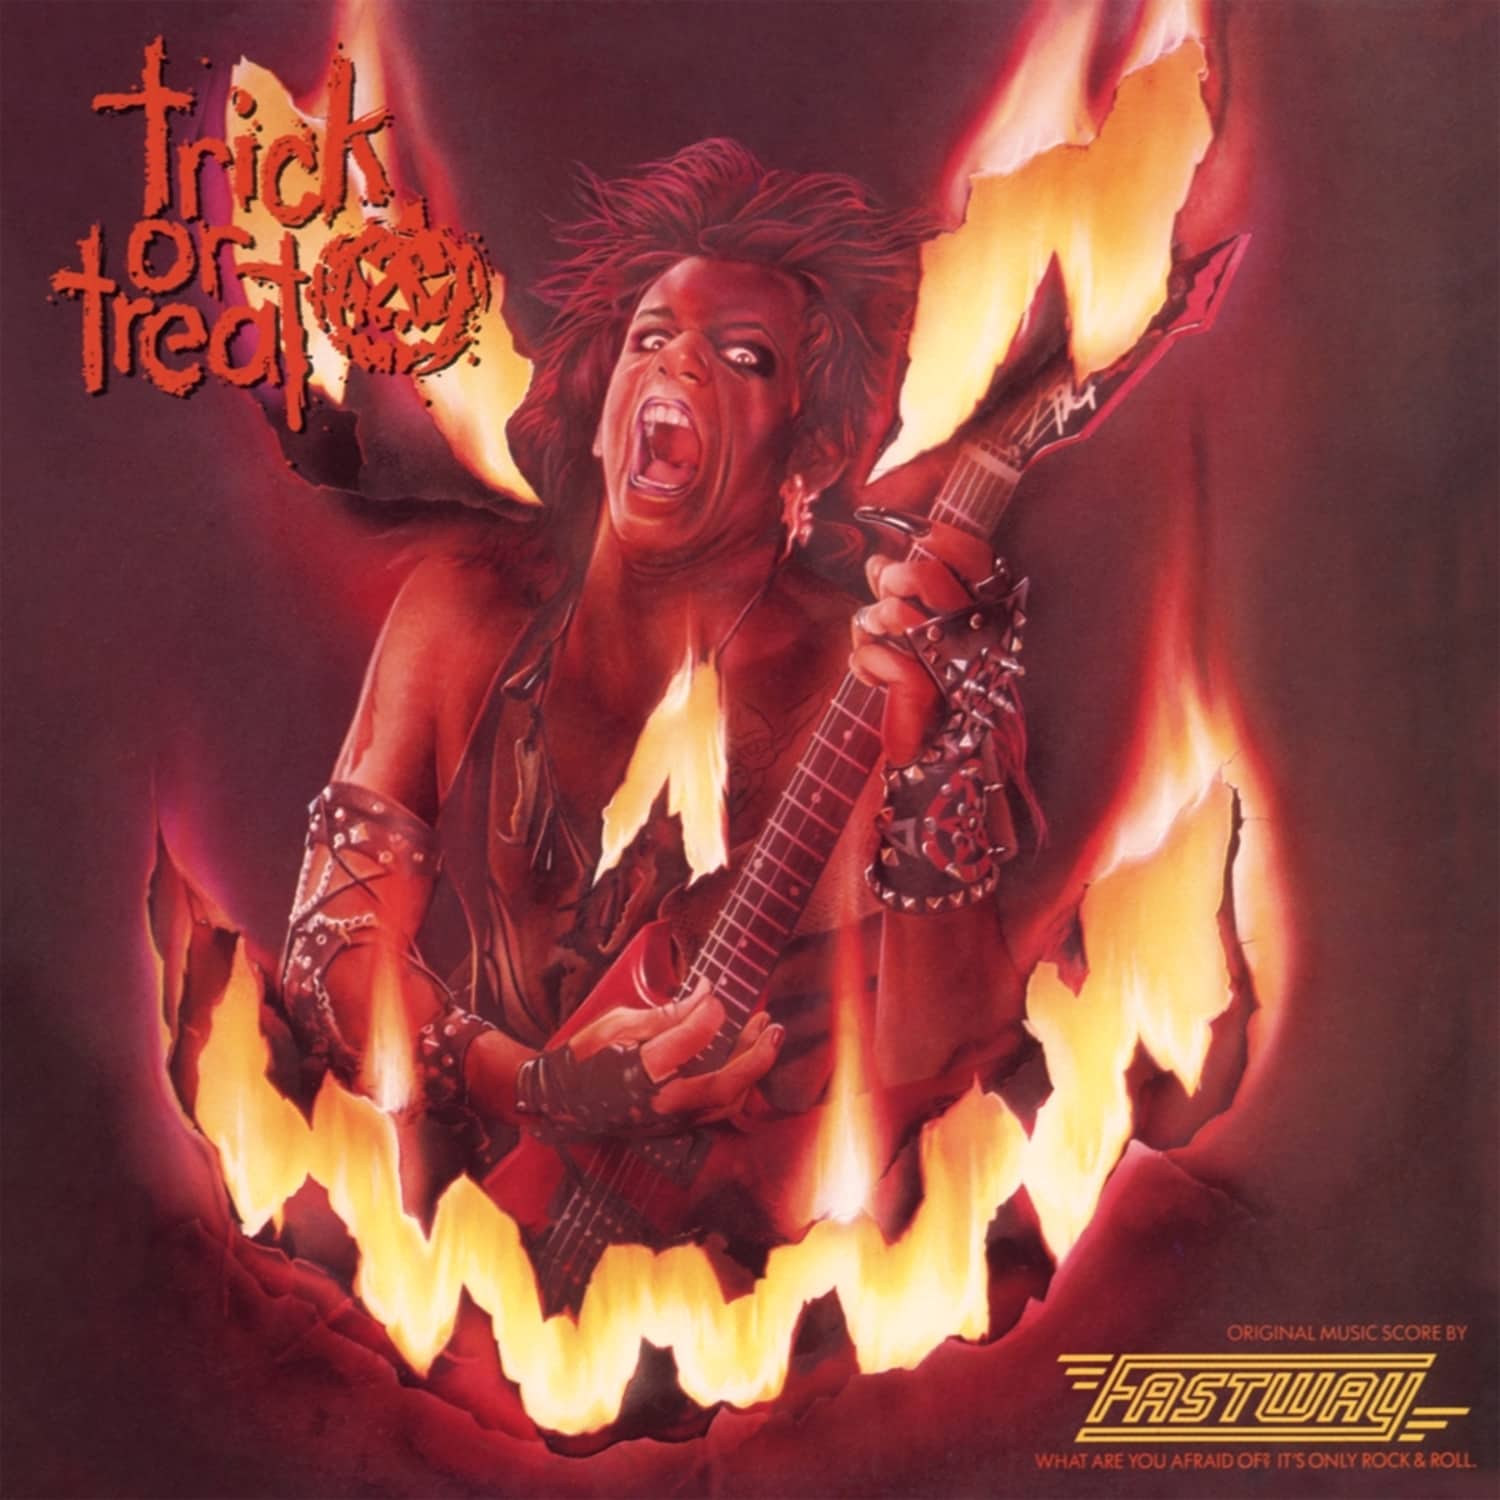 Fastway - TRICK OR TREAT 